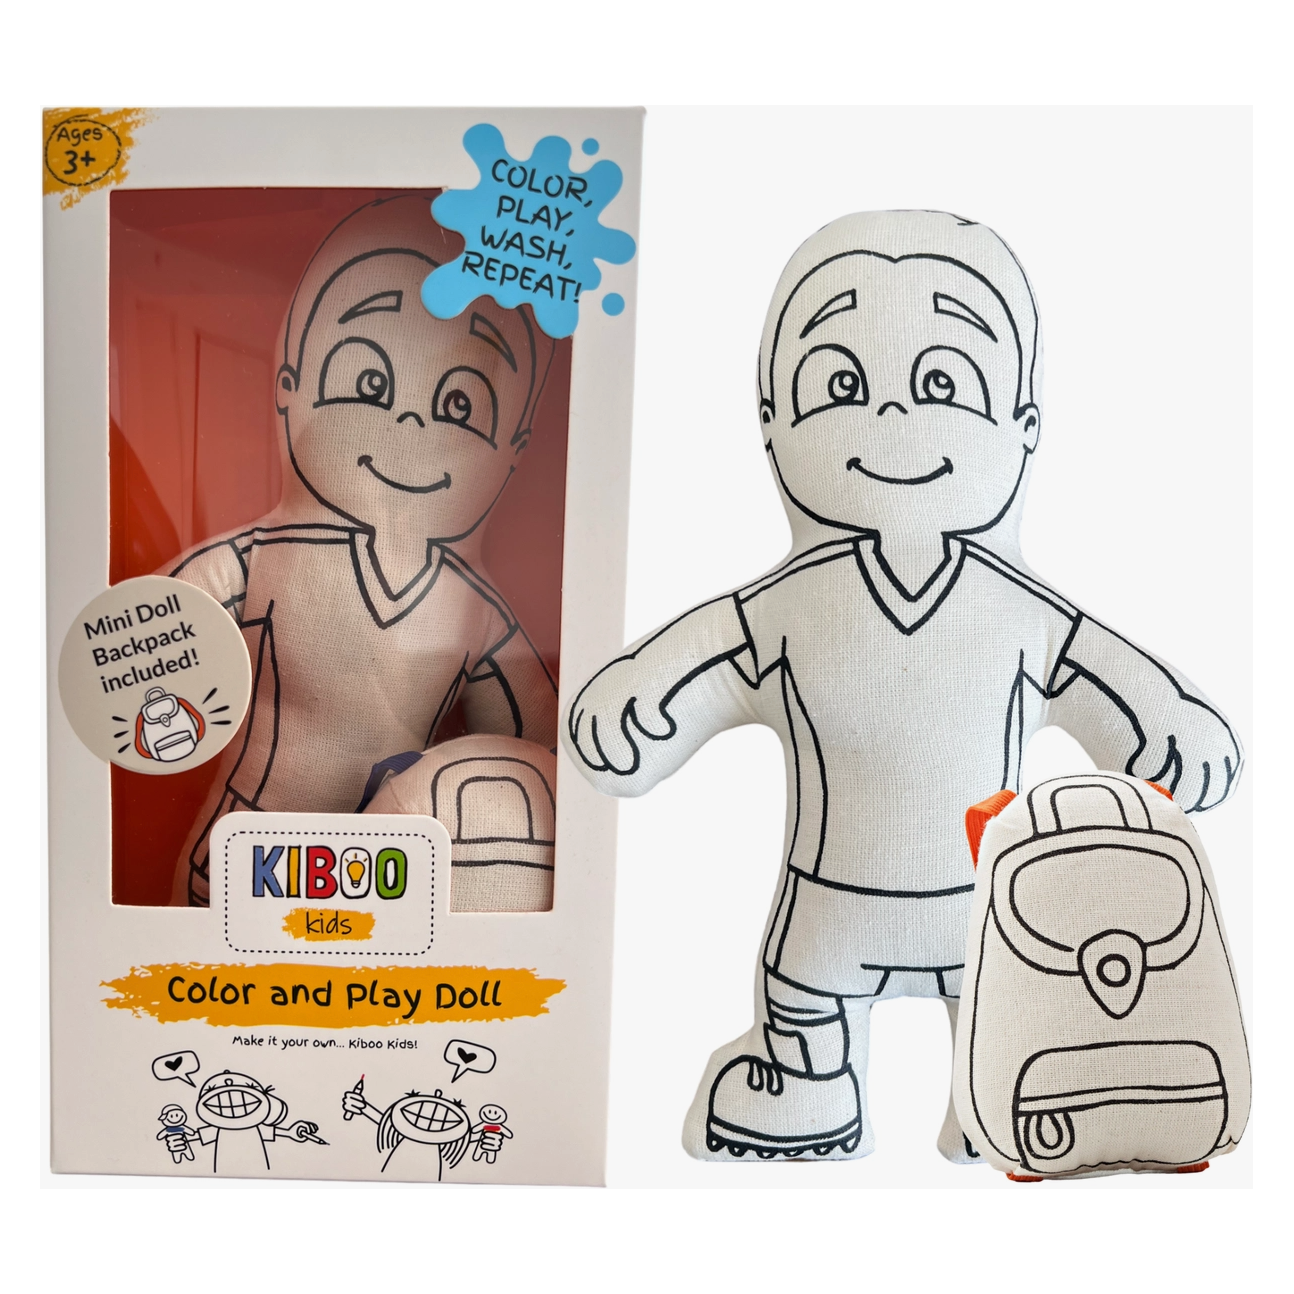 color your own doll | soccer boy